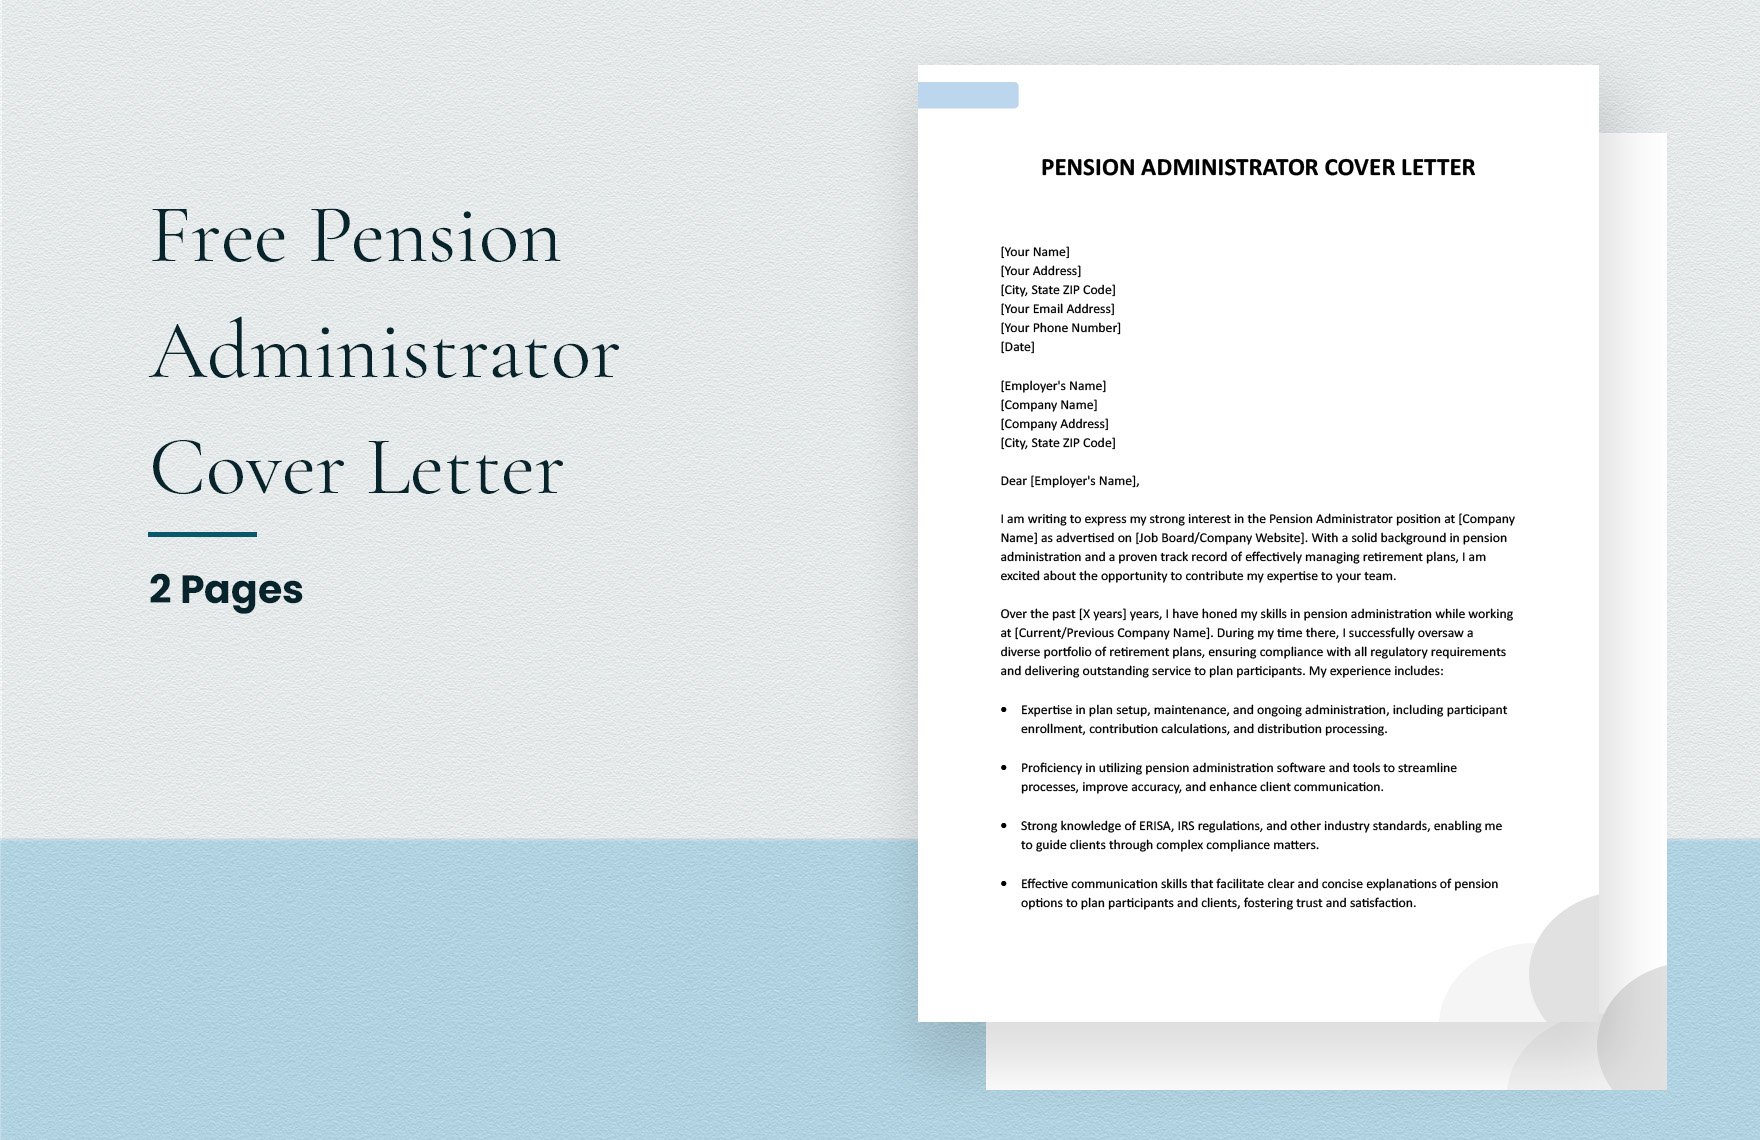 Pension Administrator Cover Letter